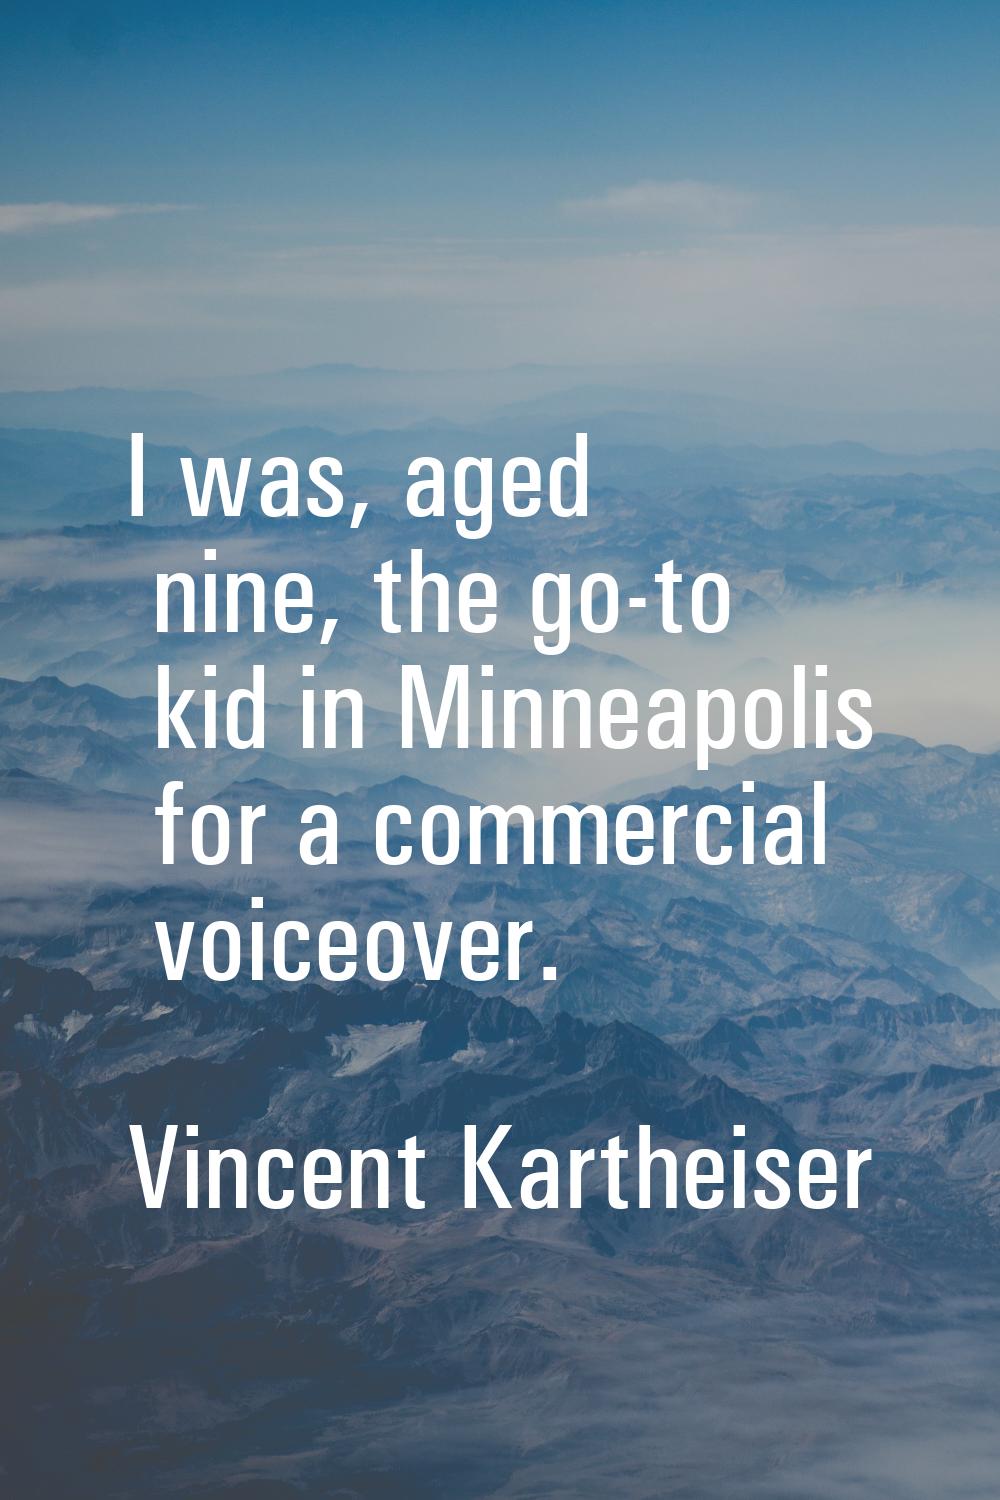 I was, aged nine, the go-to kid in Minneapolis for a commercial voiceover.